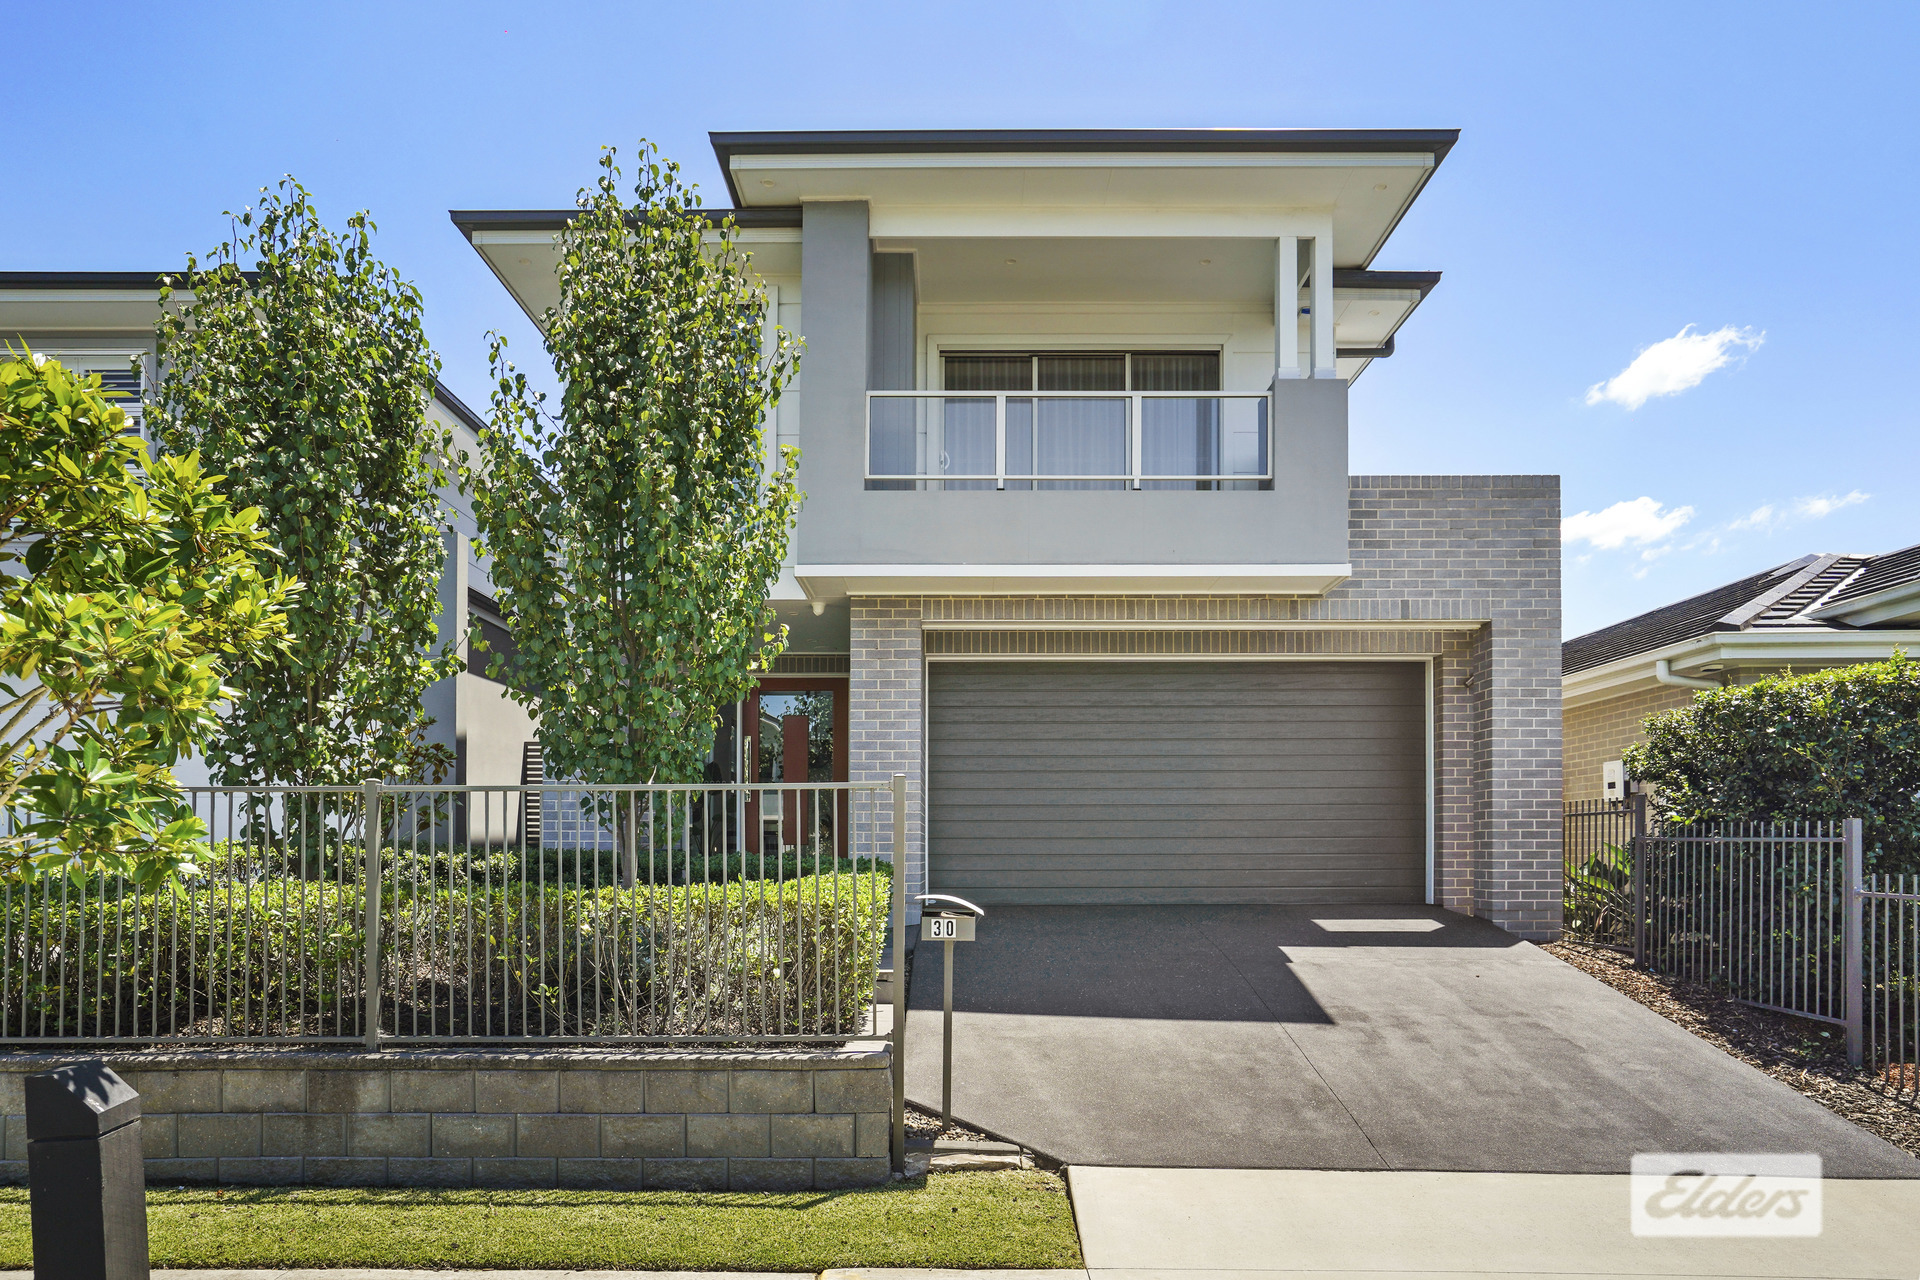 Sold House 30 Joey Crescent, Leppington NSW 2179 - Mar 15, 2023 - Homely